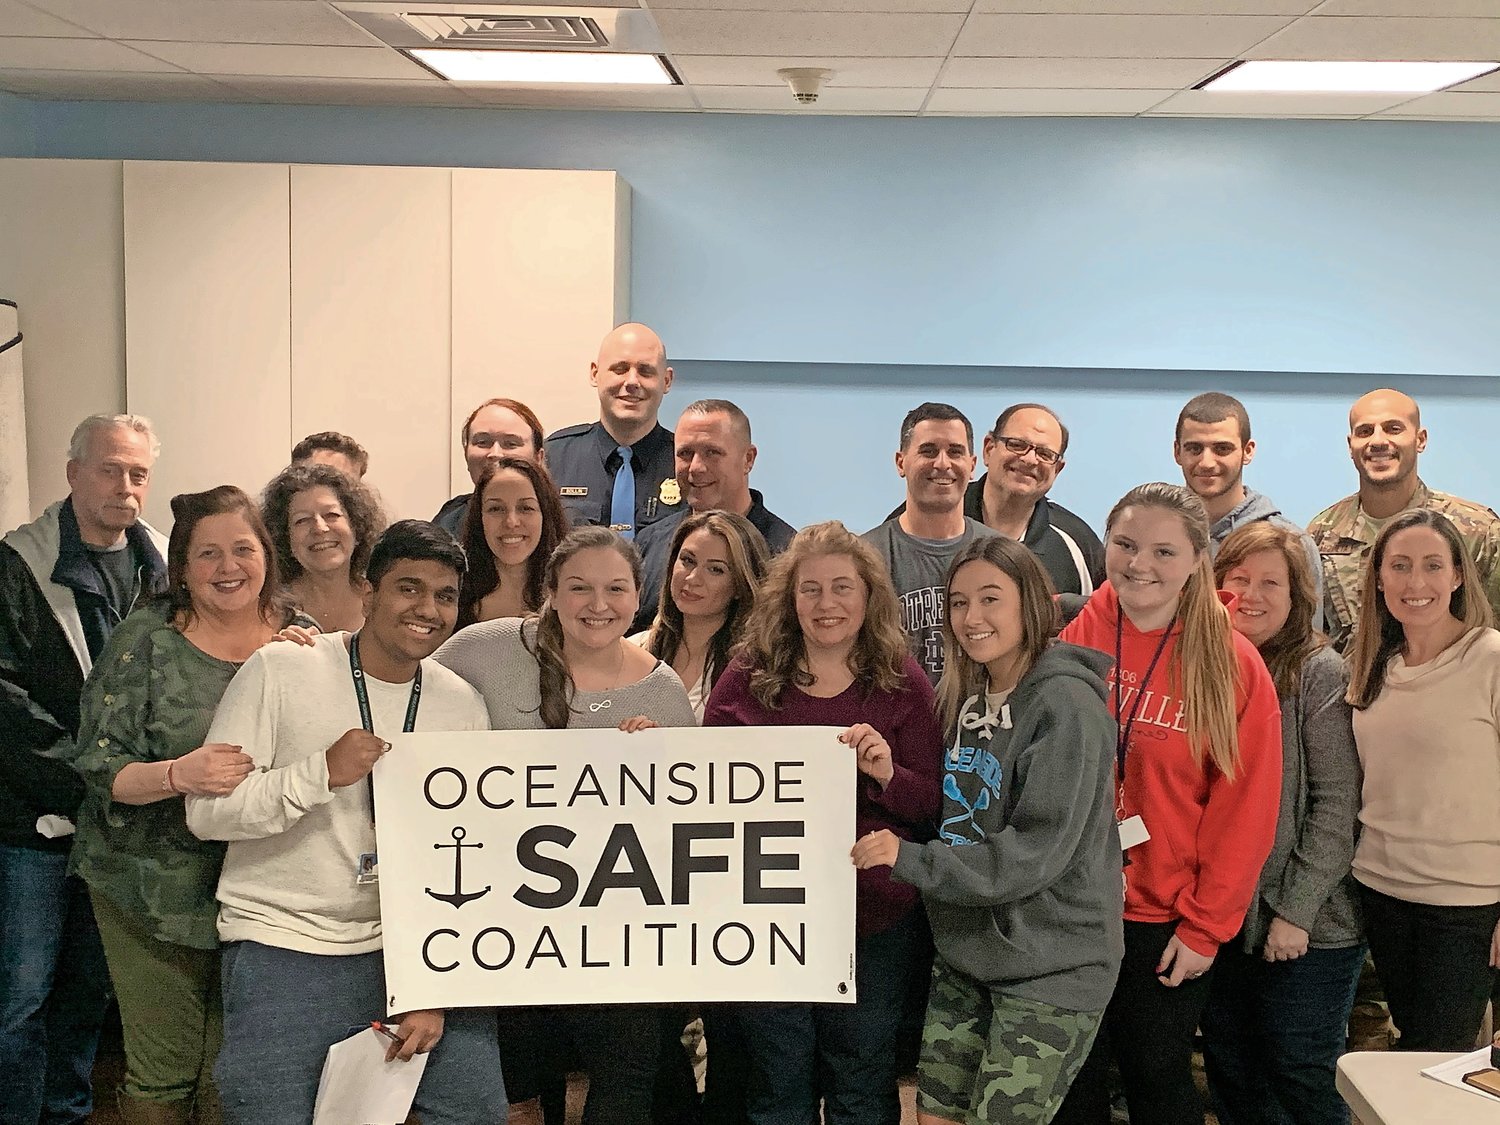 The Oceanside SAFE Coalition met on Feb. 27 at the Oceanside Library. The group typically meets every third Thursday of the month.